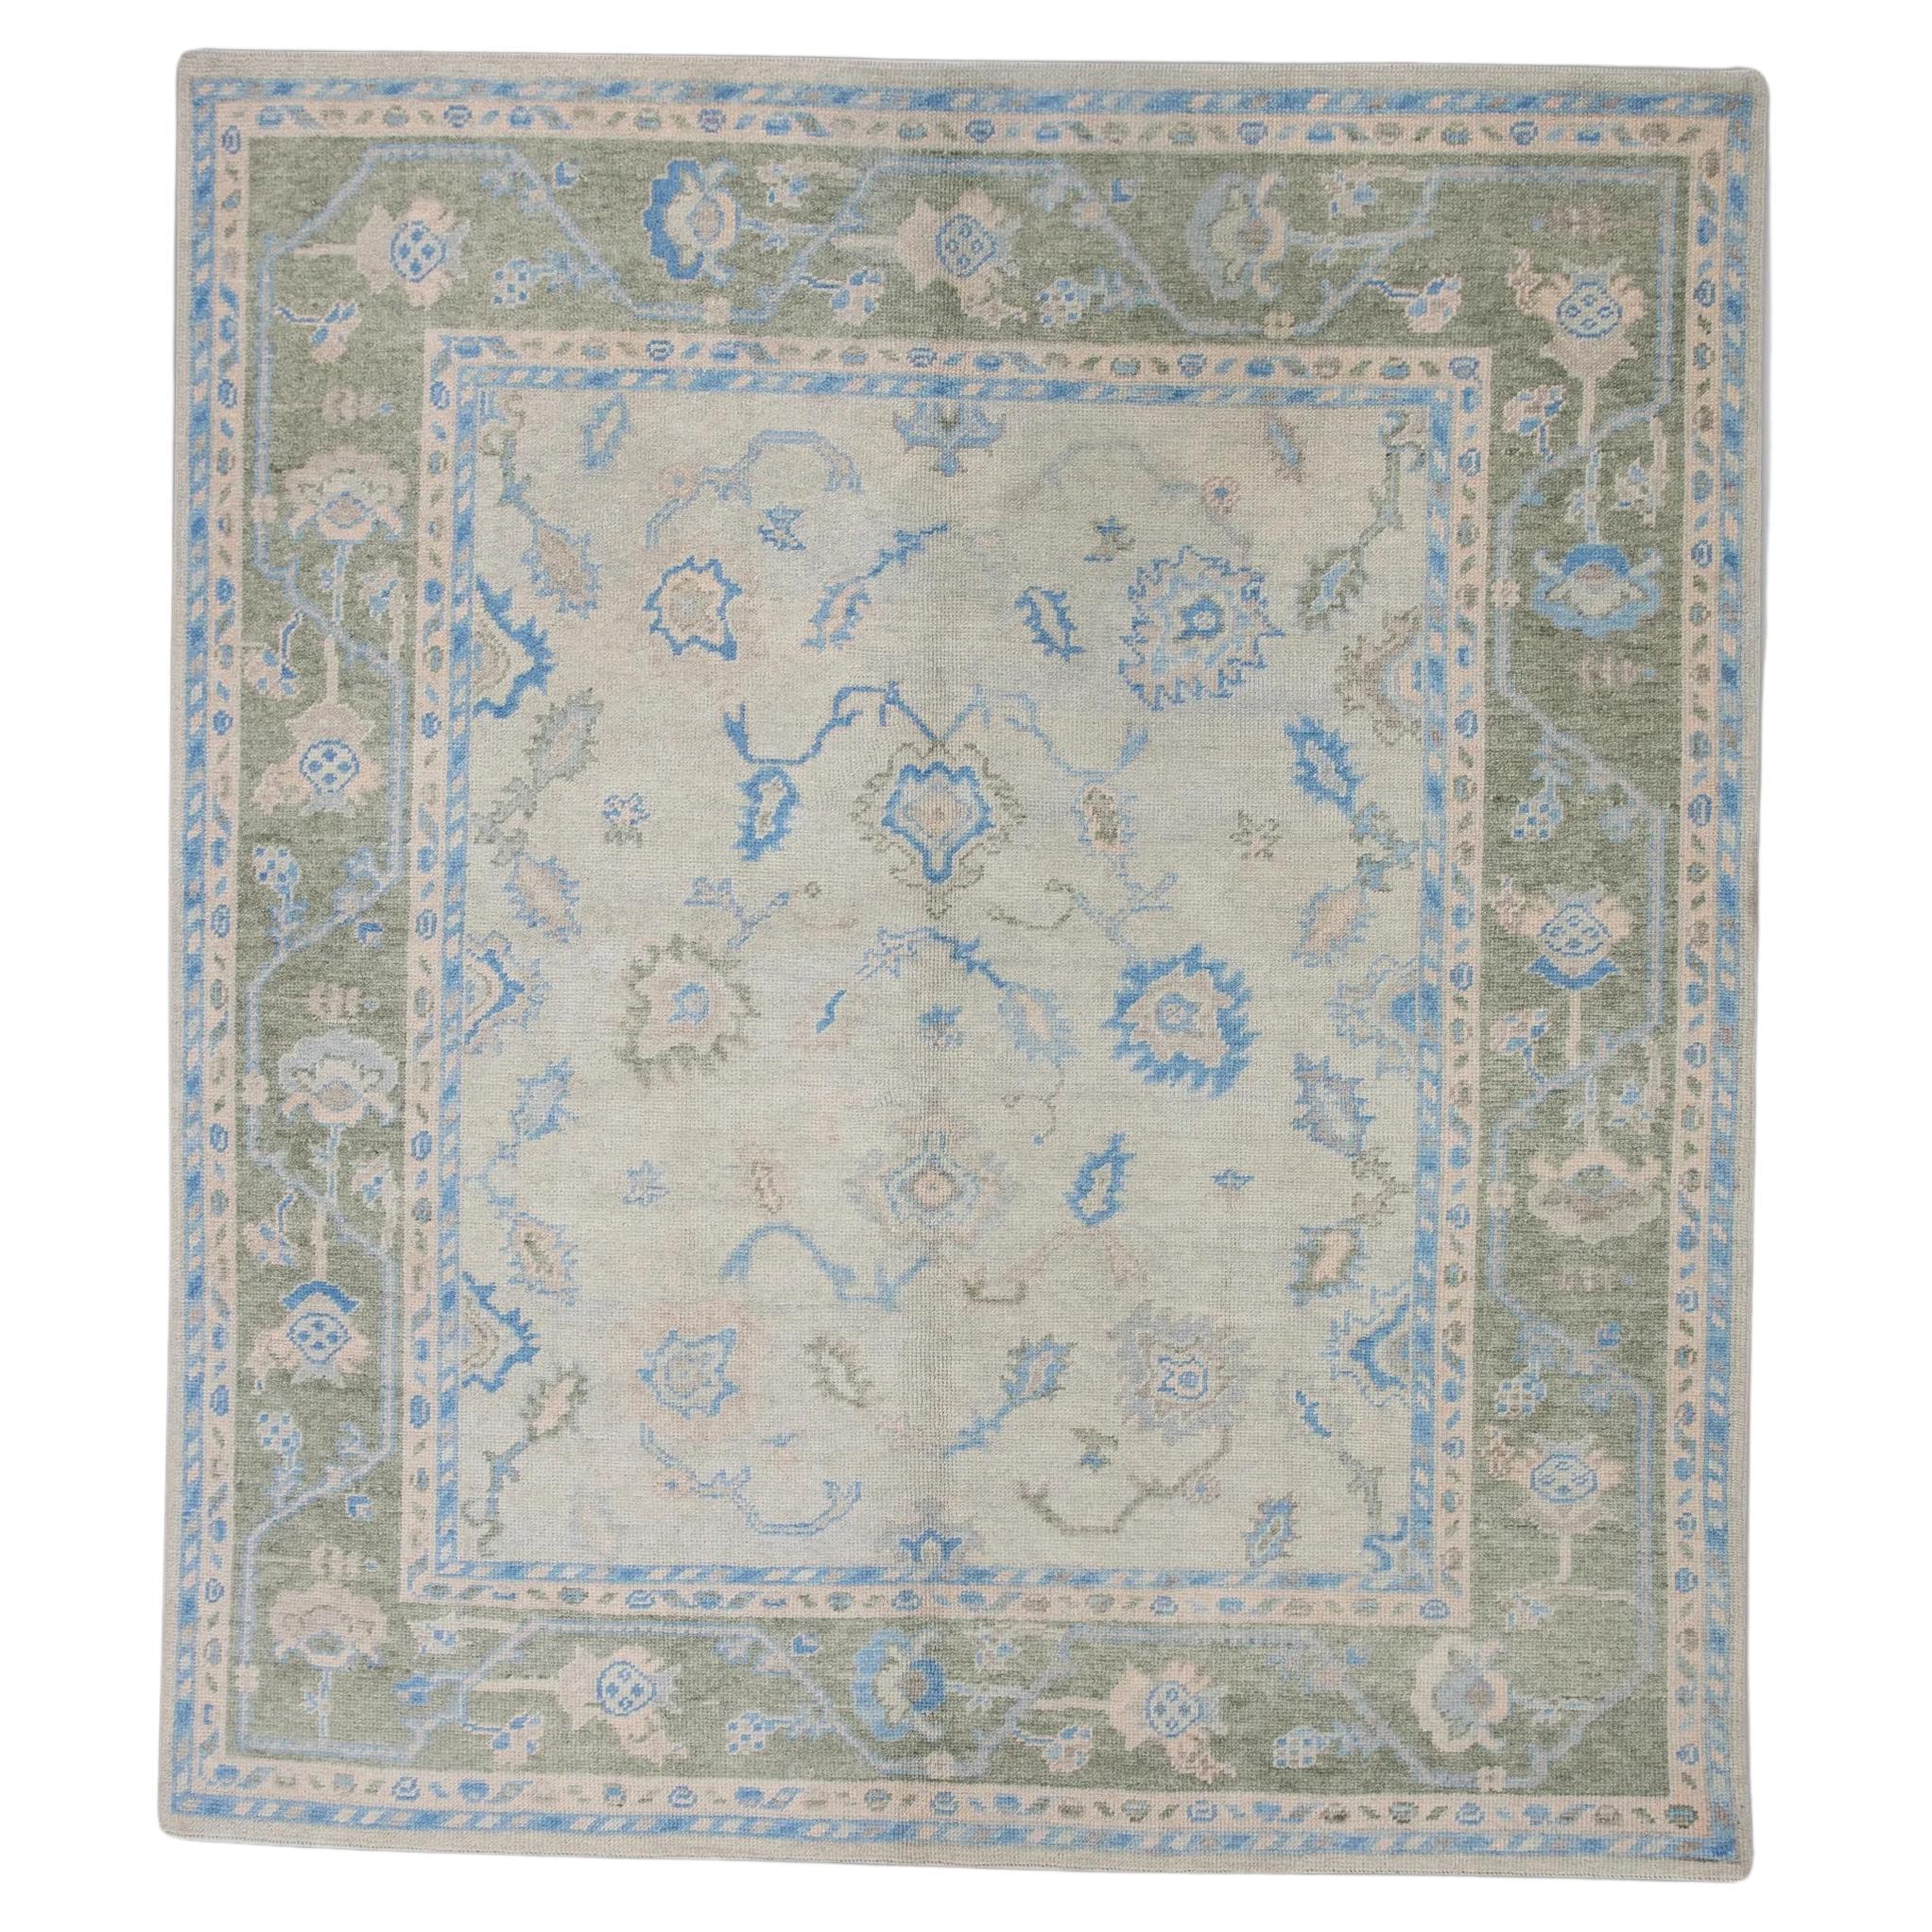 Green and Blue Floral Pattern Handwoven Wool Turkish Oushak Rug 6'10" x 8'1"